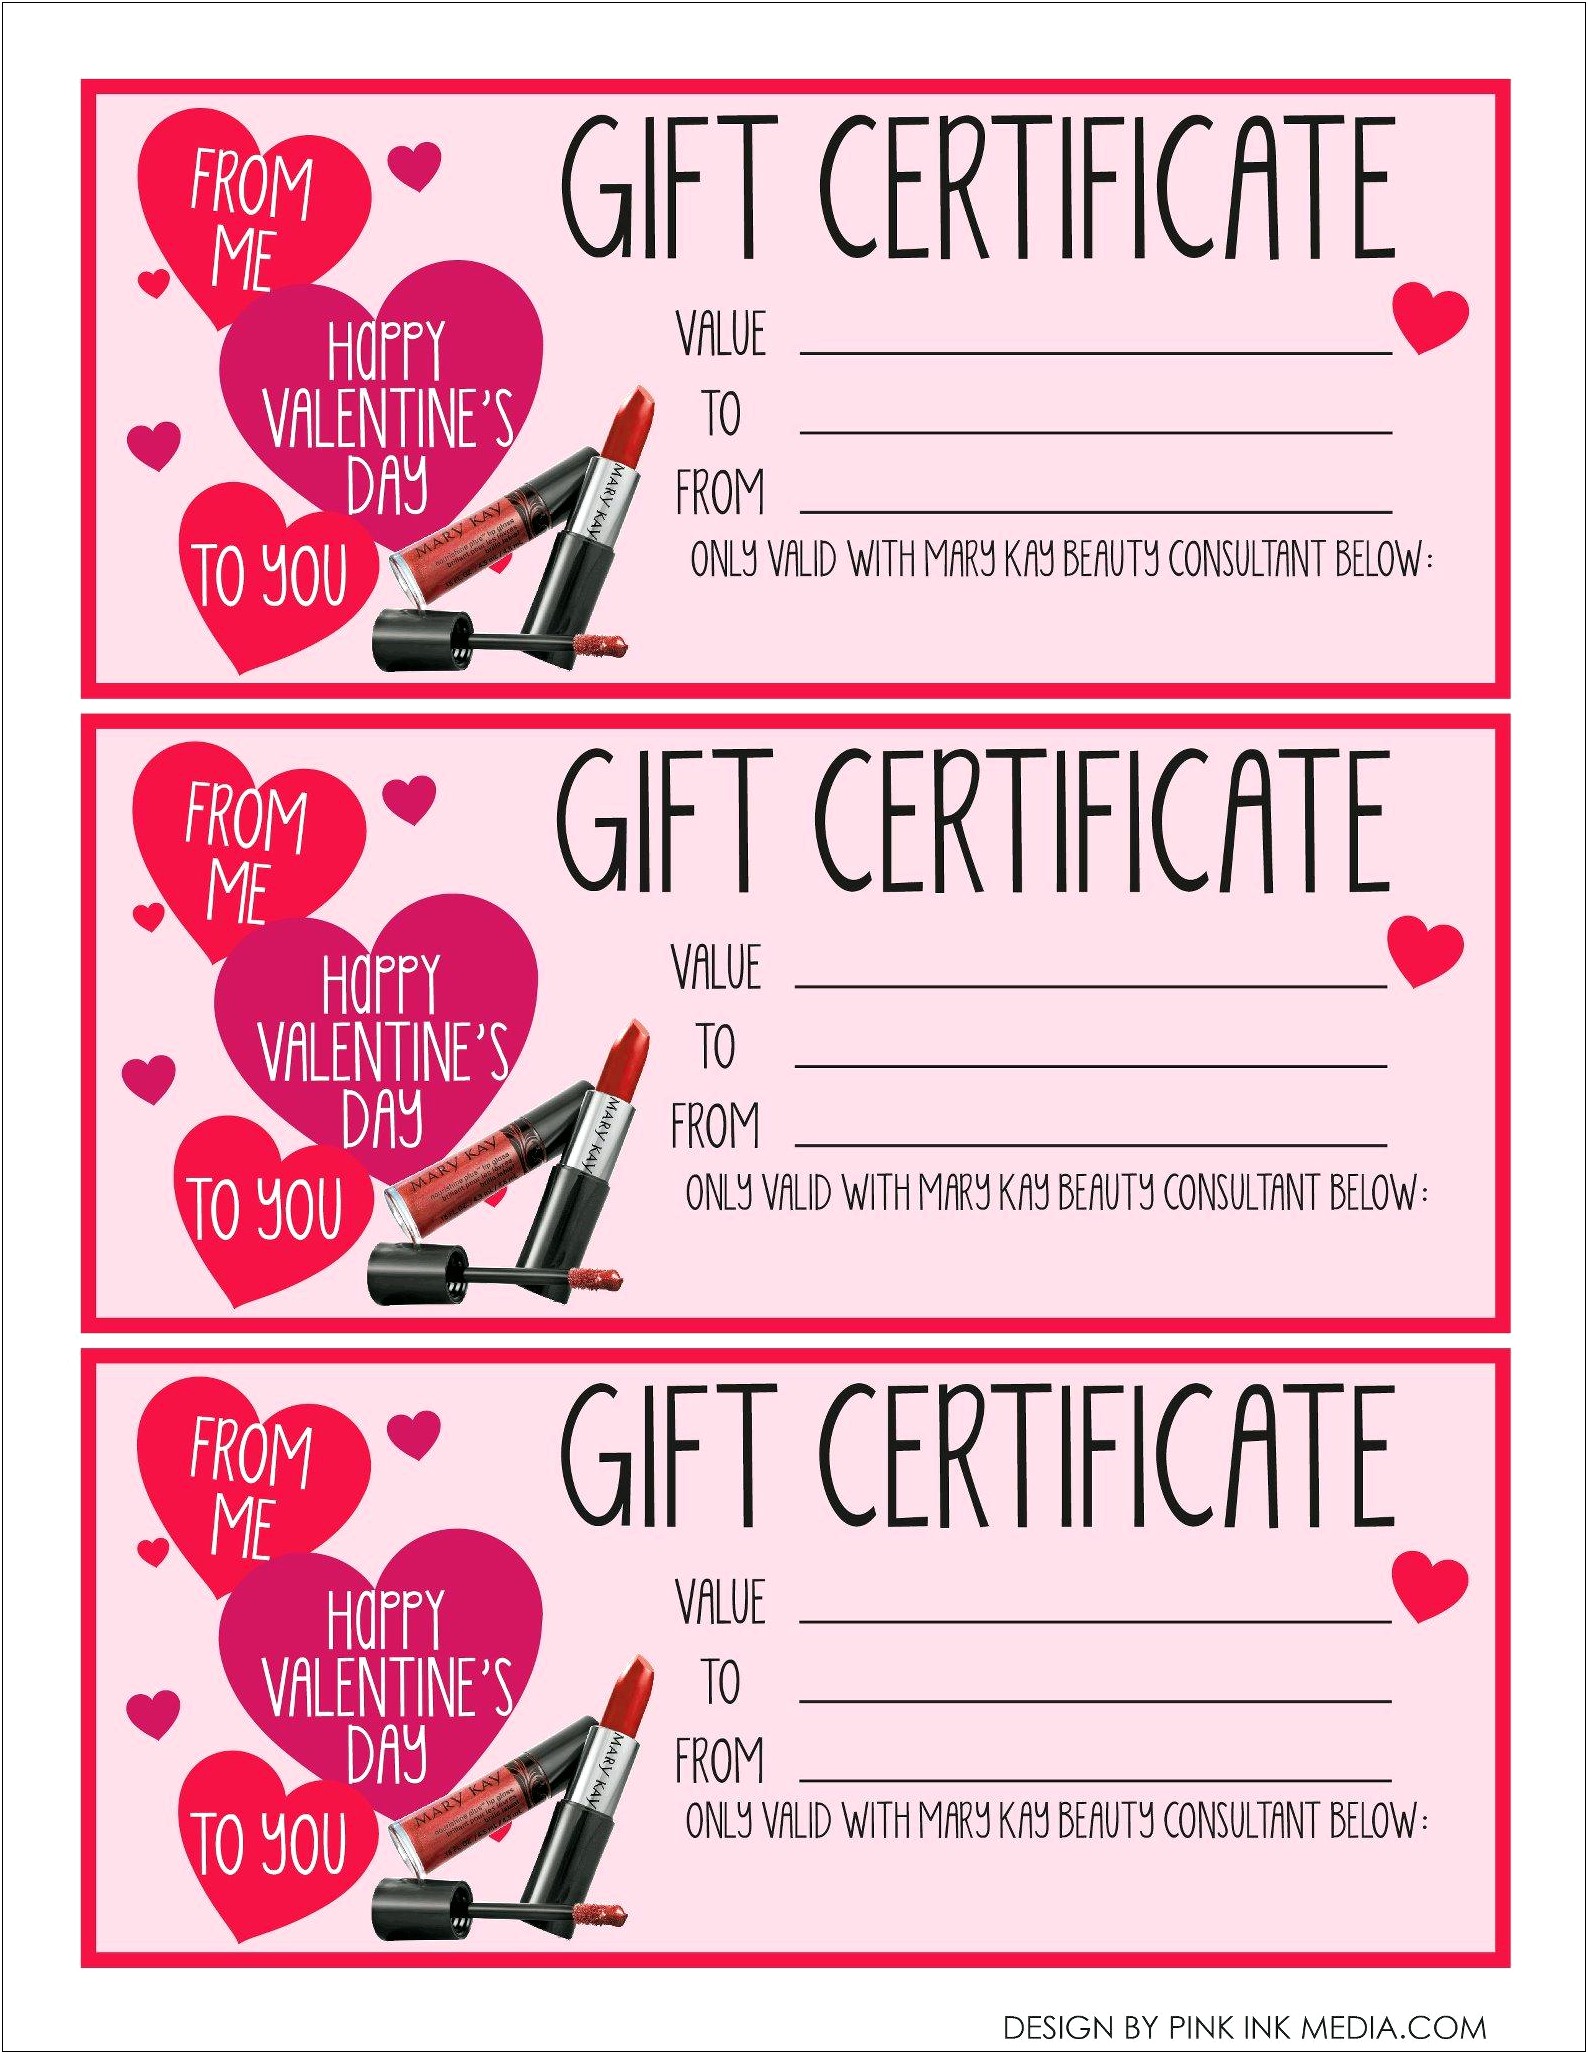 Mary Kay Gift Certificates Free Template